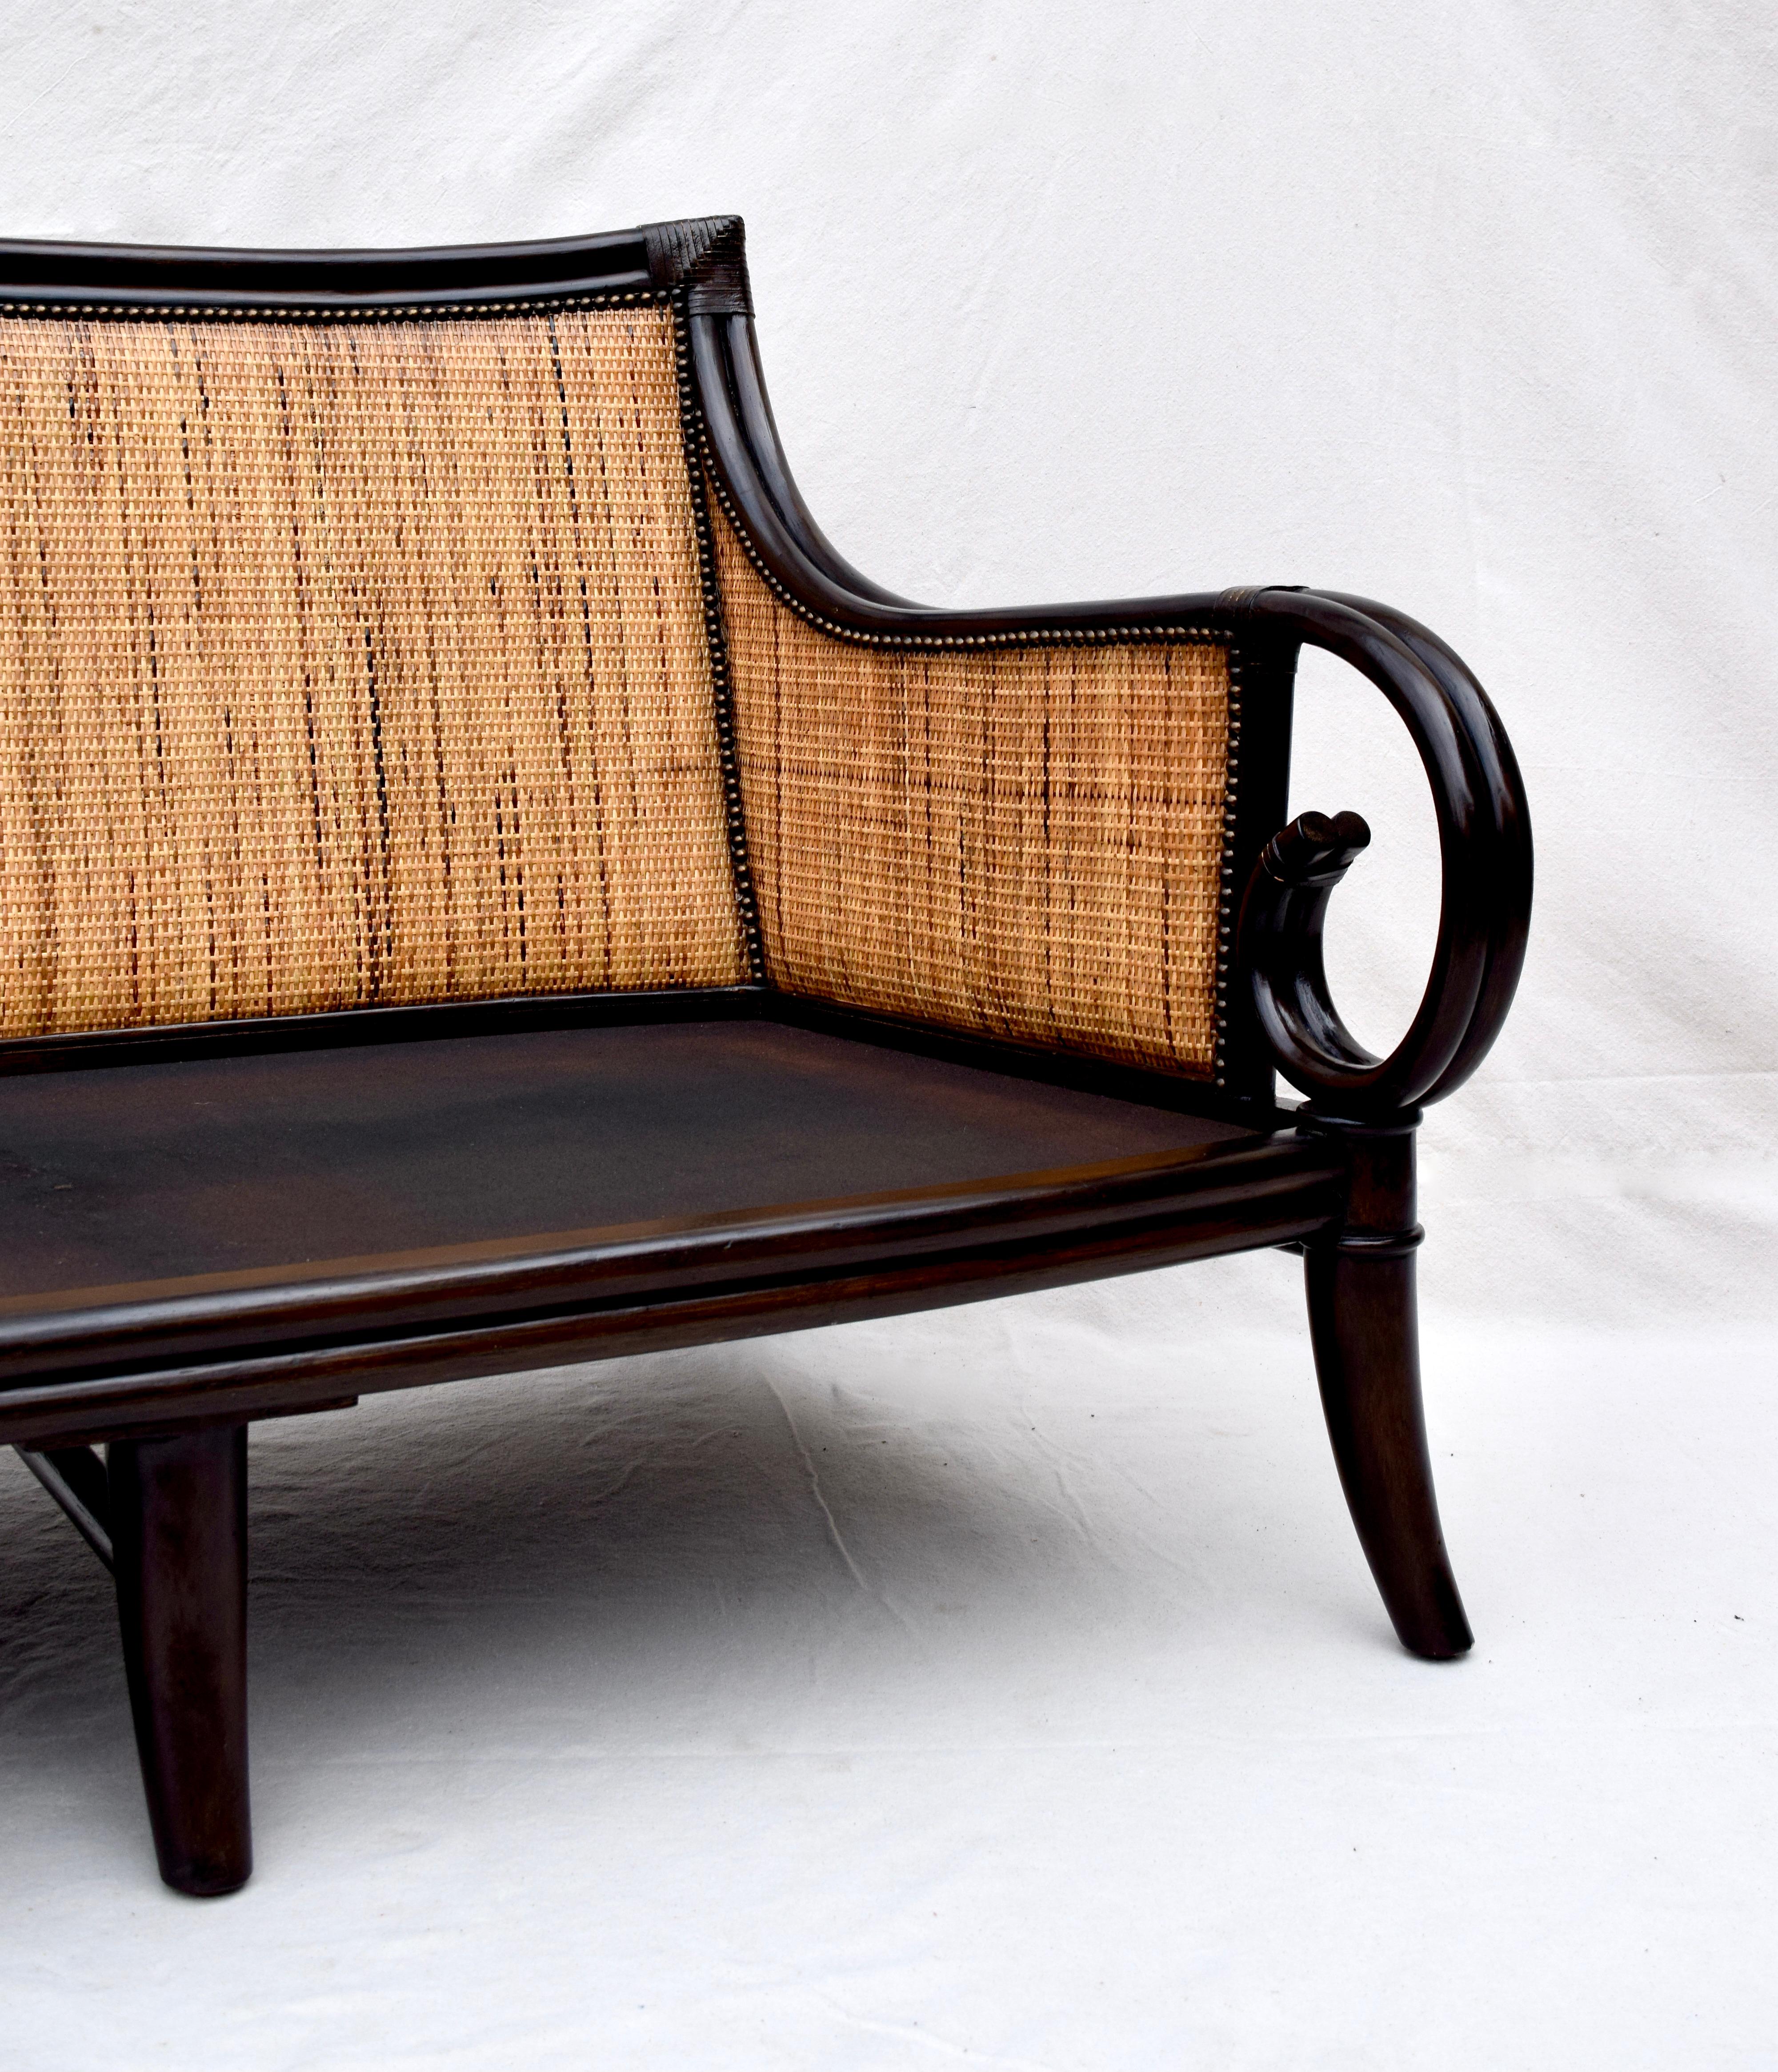 British Colonial Style Rattan Leather and Cane Sofa 2